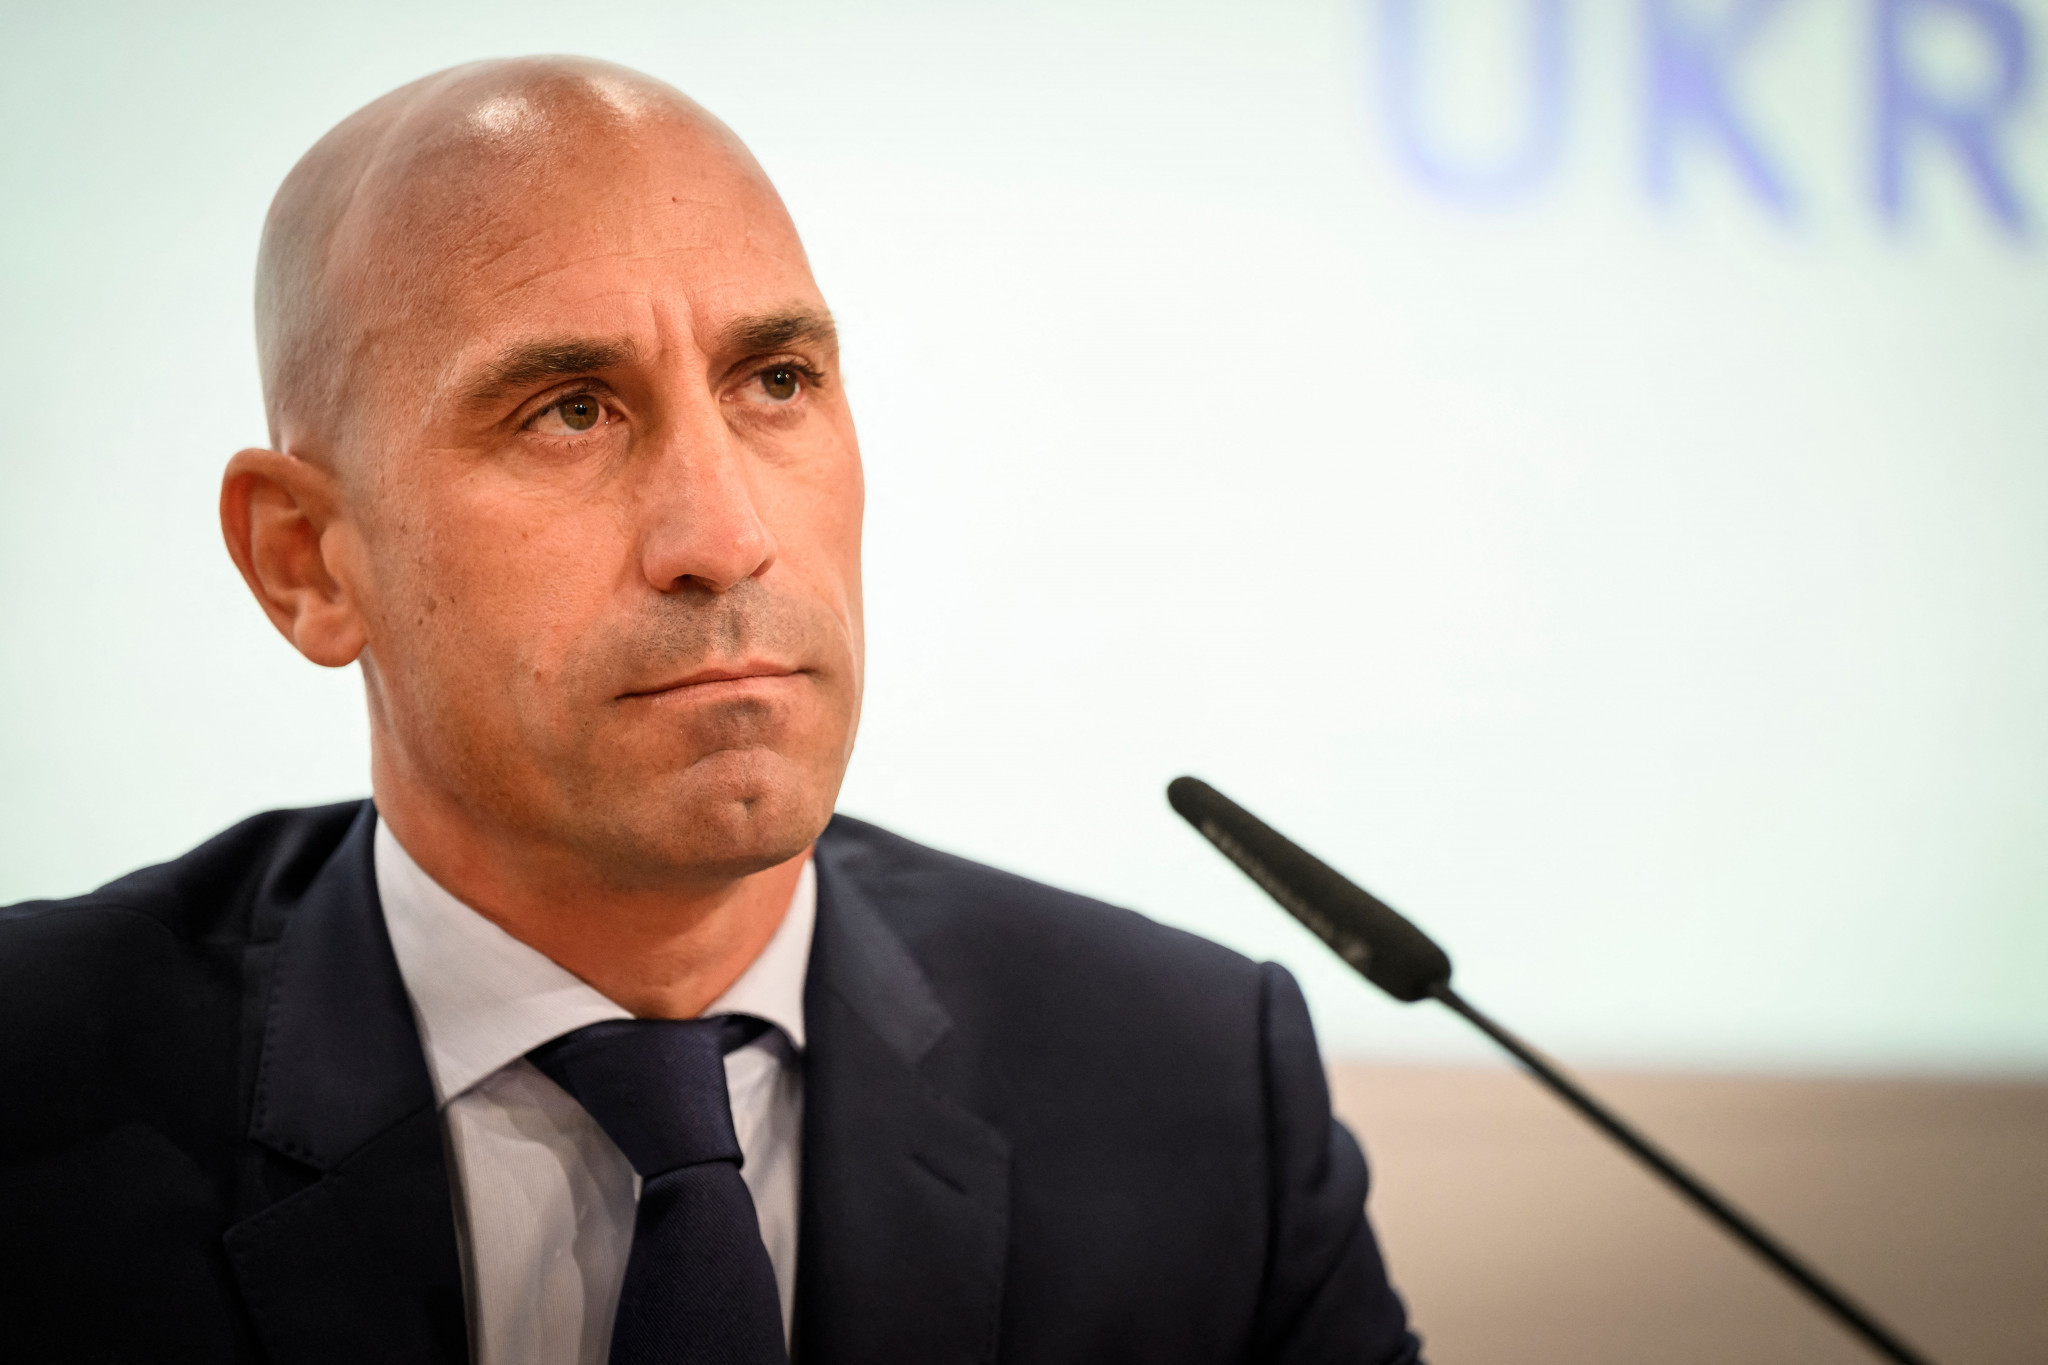 Rubiales summoned to Spanish court accused of sexual assault over Hermoso kiss